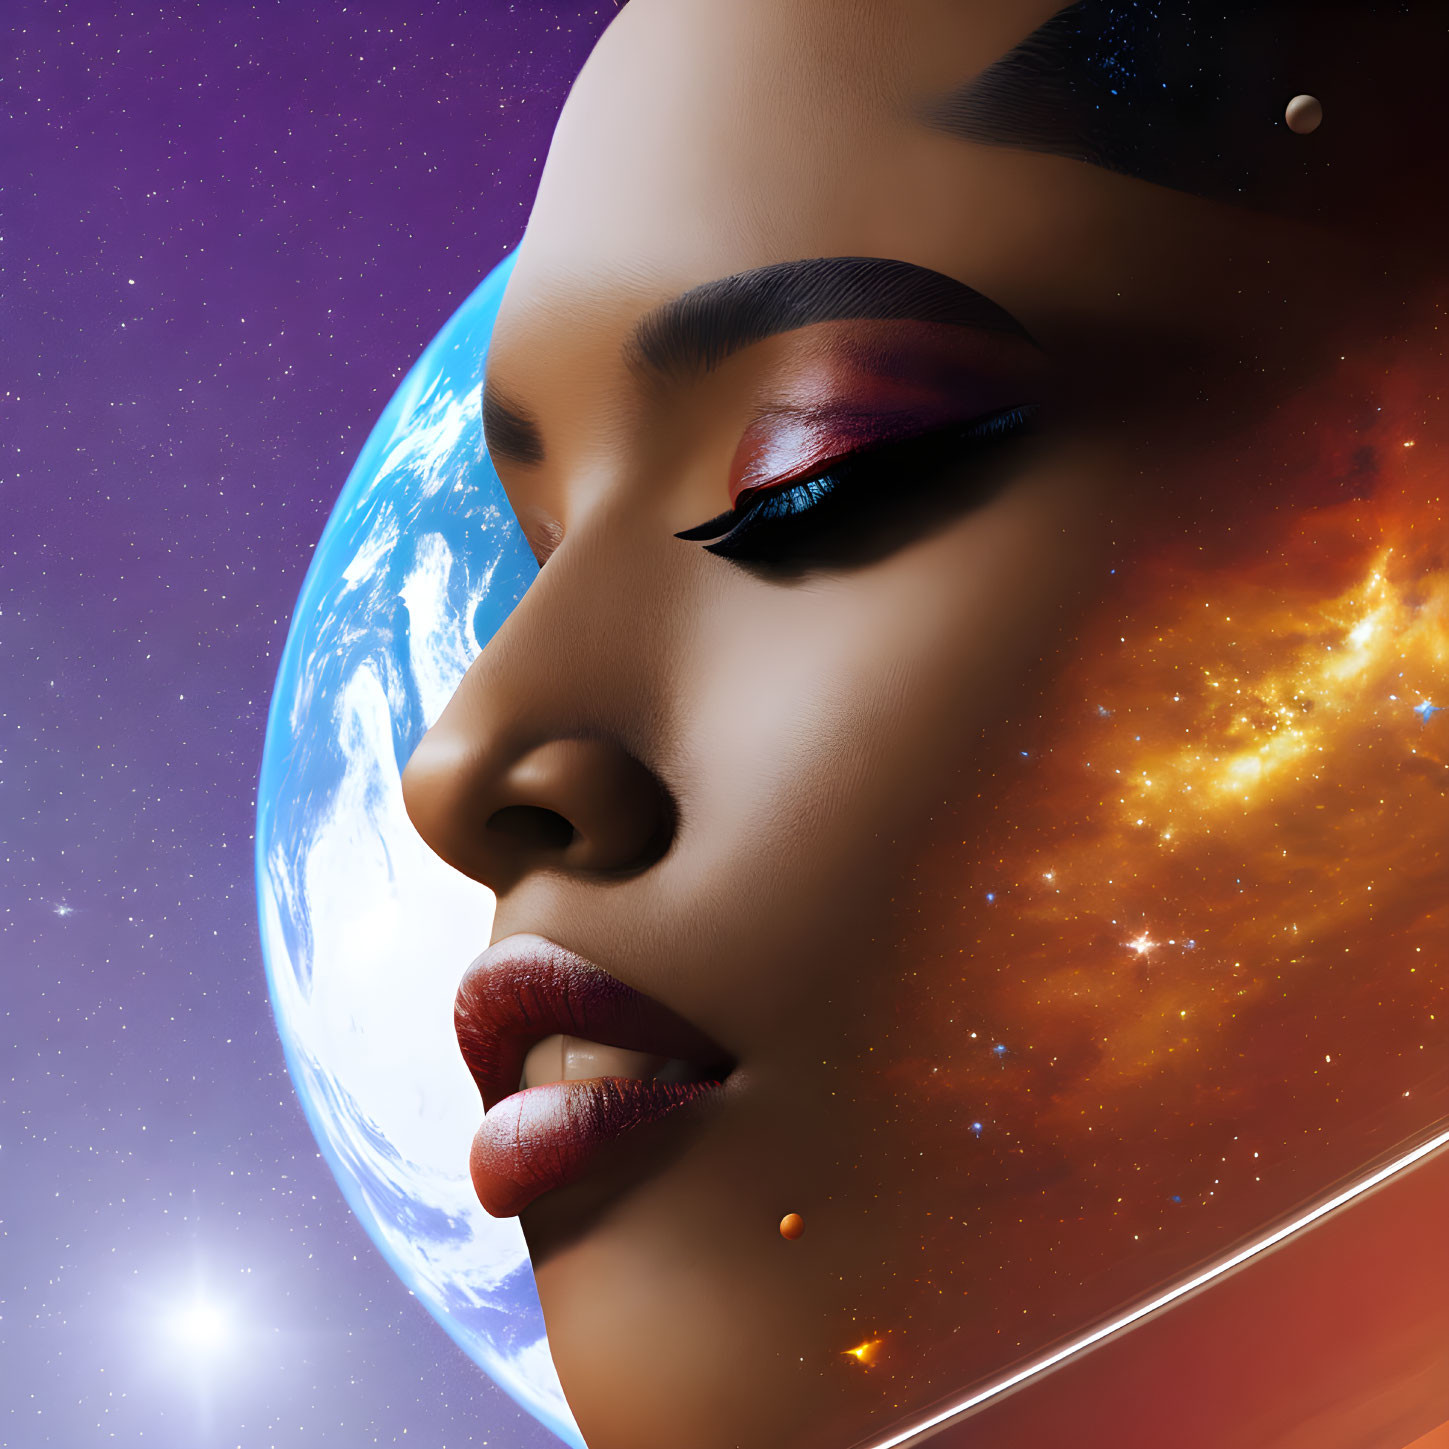 Surreal artwork: Woman's face merges with cosmic background